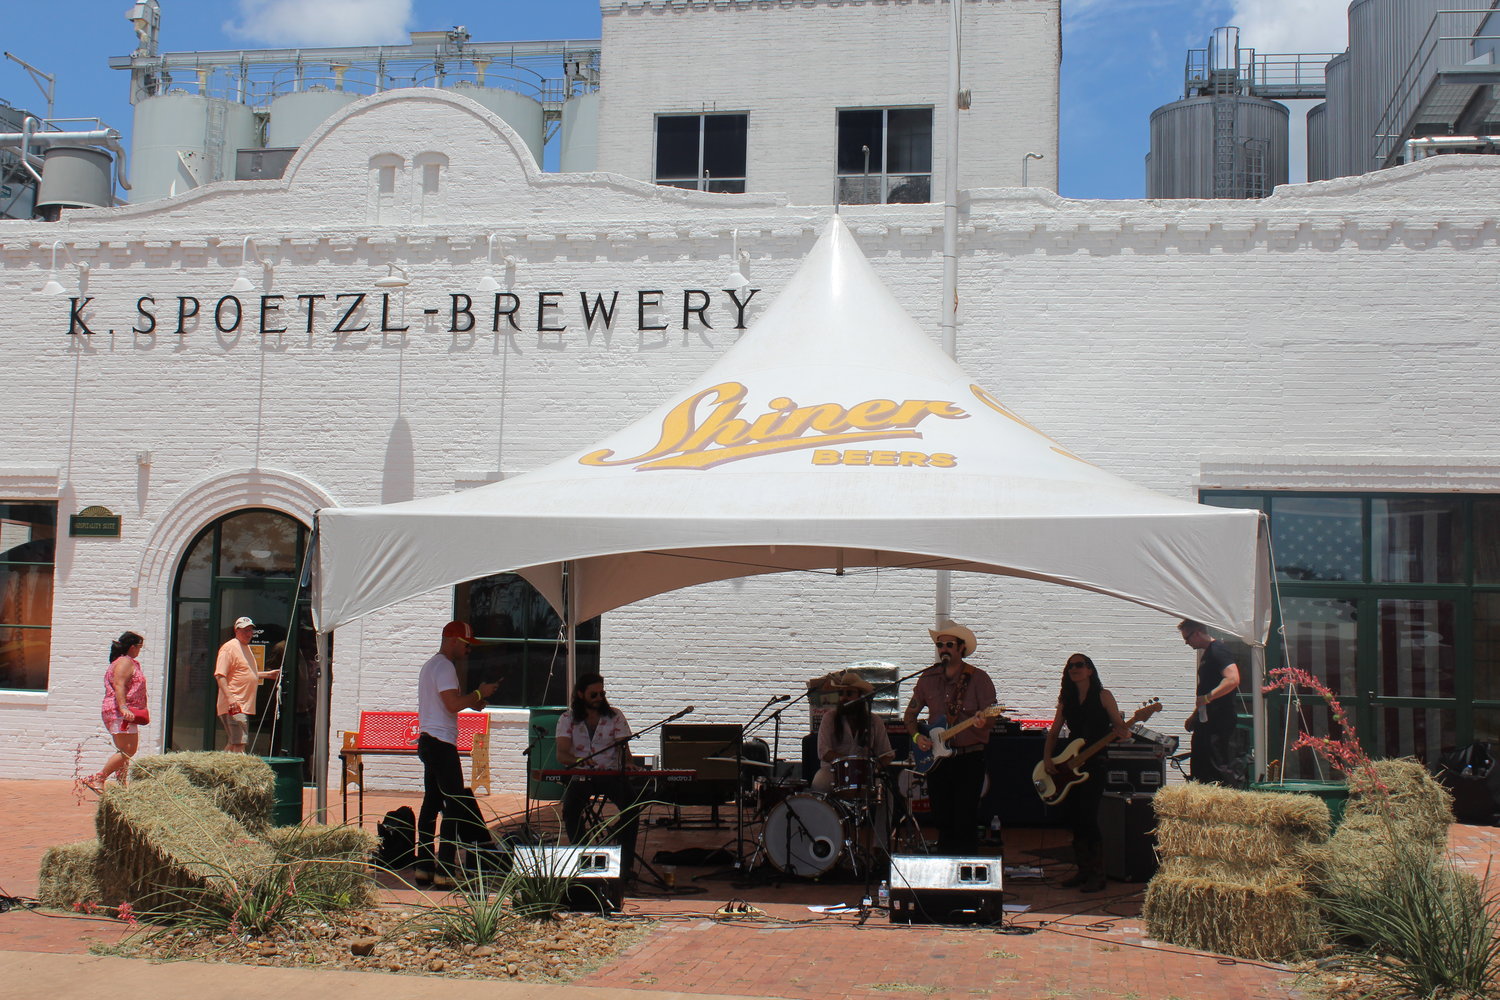 The inaugural Shiner Saturdays event took place last week, with a large crowd pouring in to enjoy Shiner beer, free barbecue and some live music. The next “Shiner Saturday” event will be on July 13 at the Spoetzl Brewery.